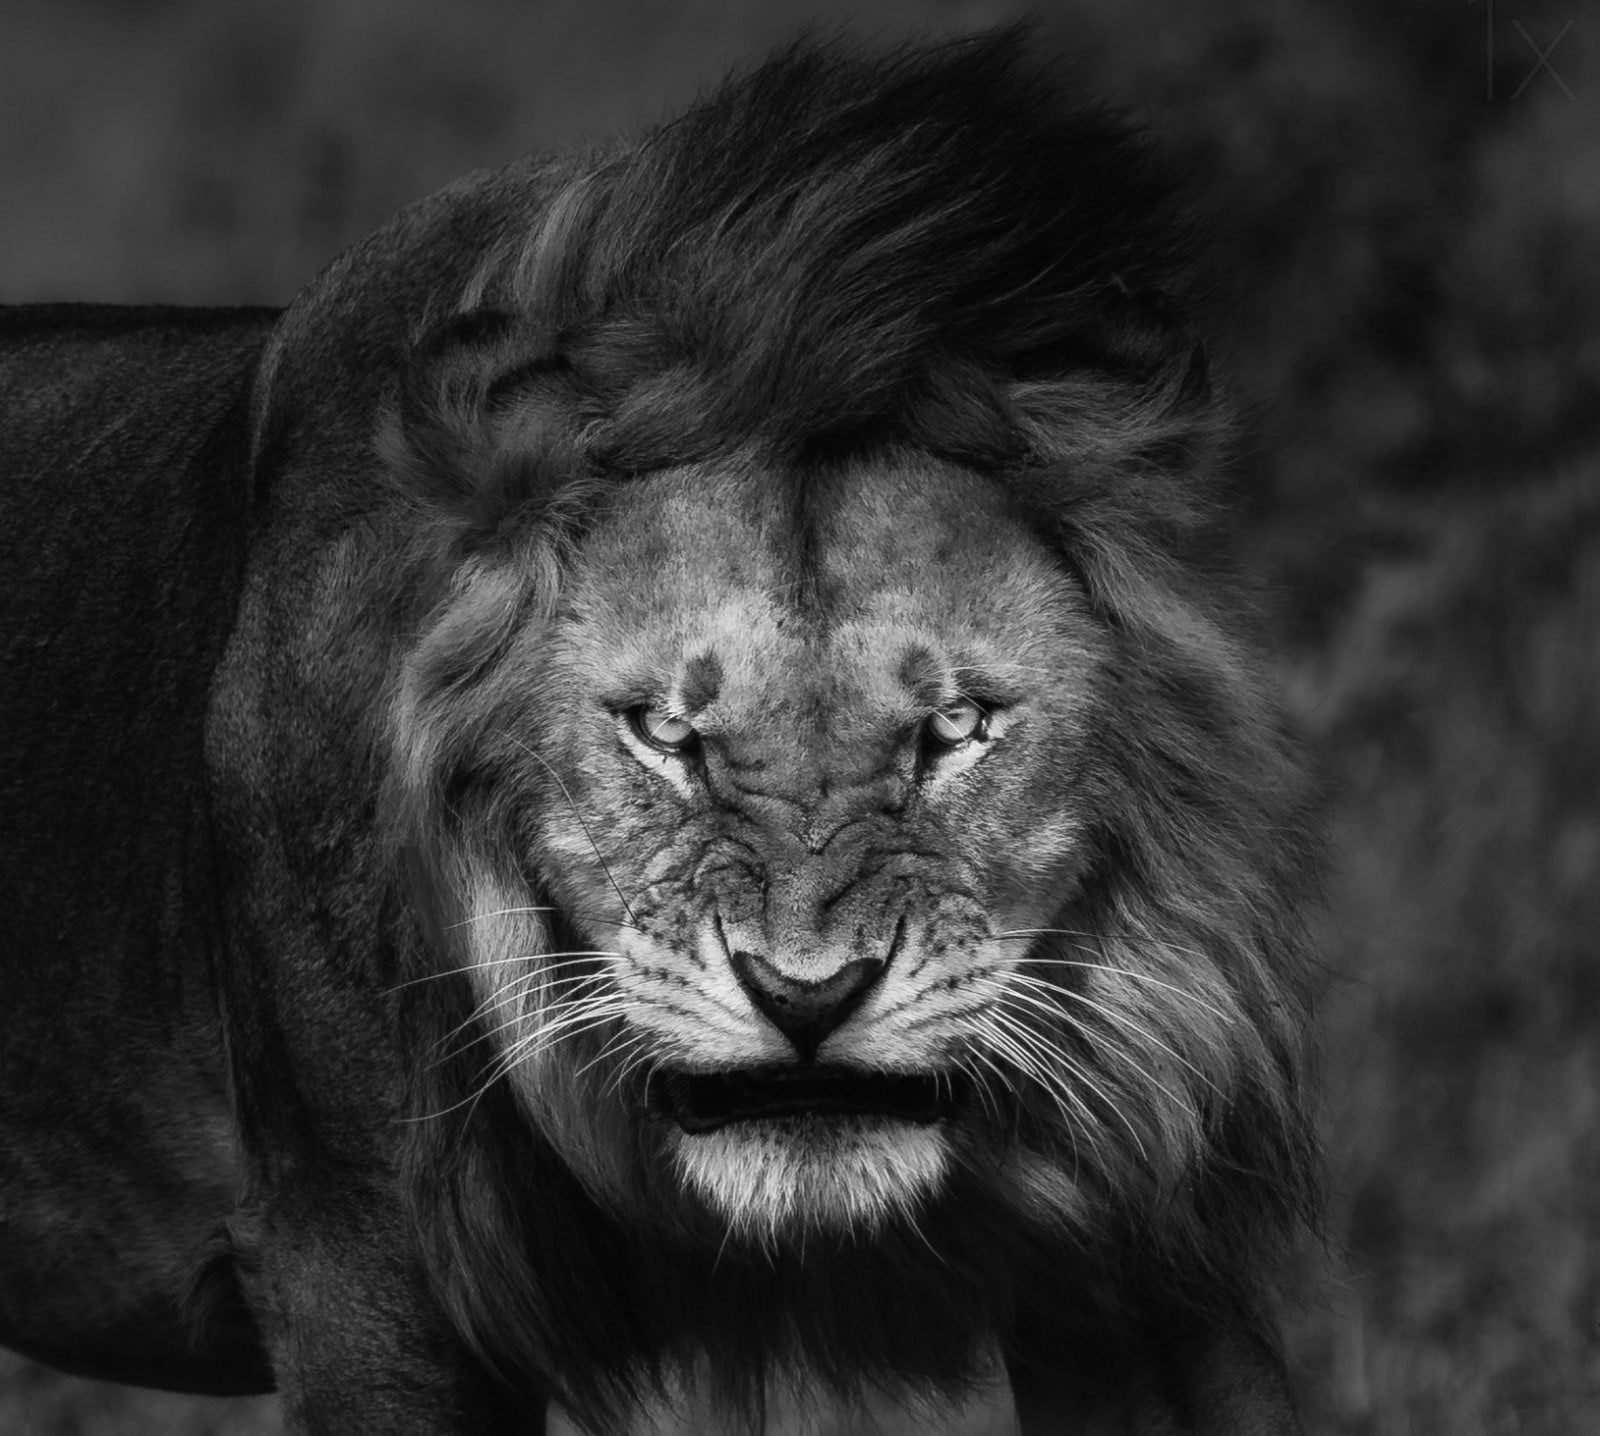 Grayscale photography of lion wallpaper, nature, big cats, Fury, angry